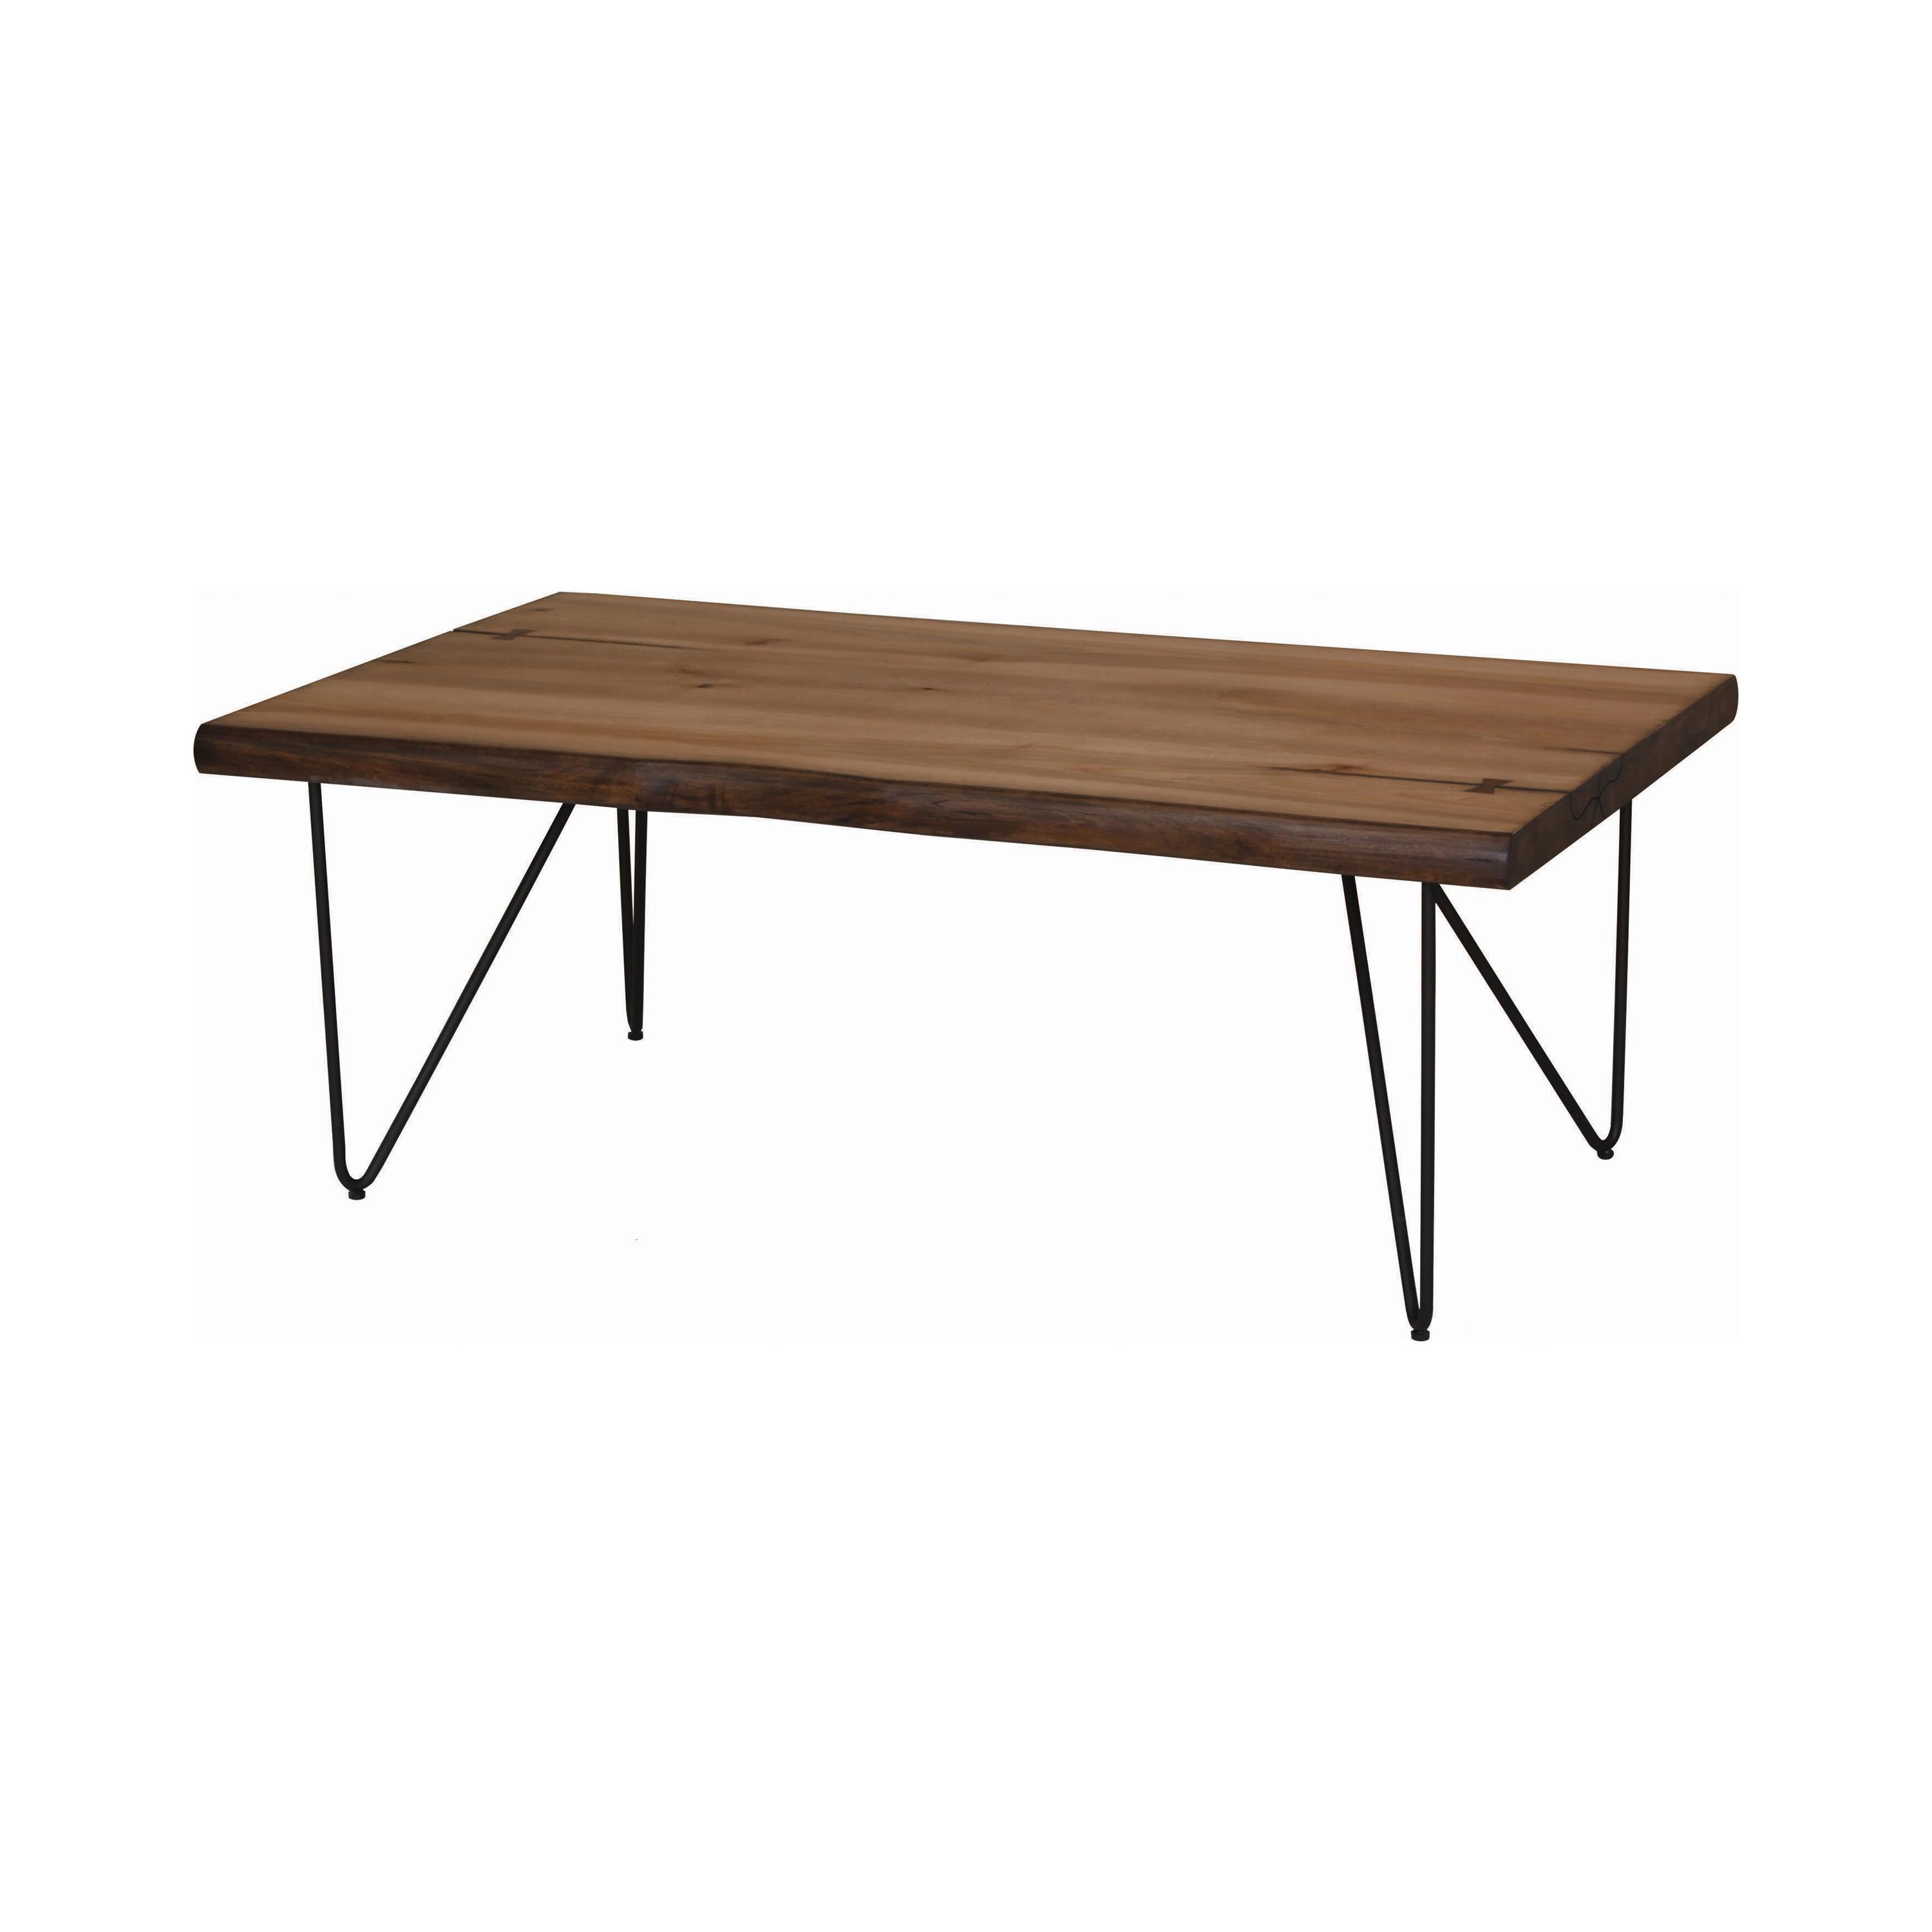 Modern Coffee Table 707758 707758 in Natural 